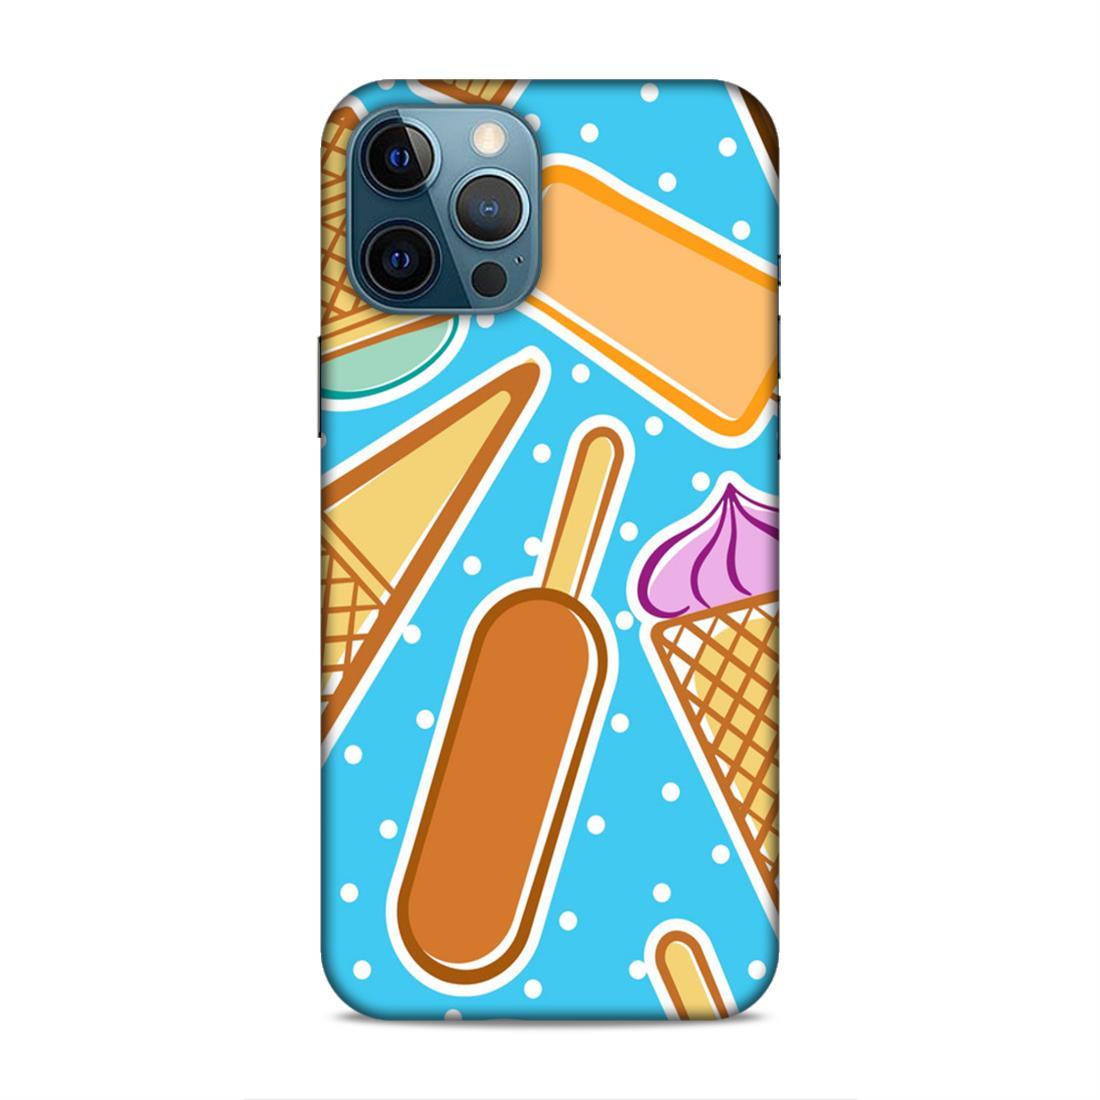 Candy Corn Blue iPhone 12 Pro Max Mobile Cover Case